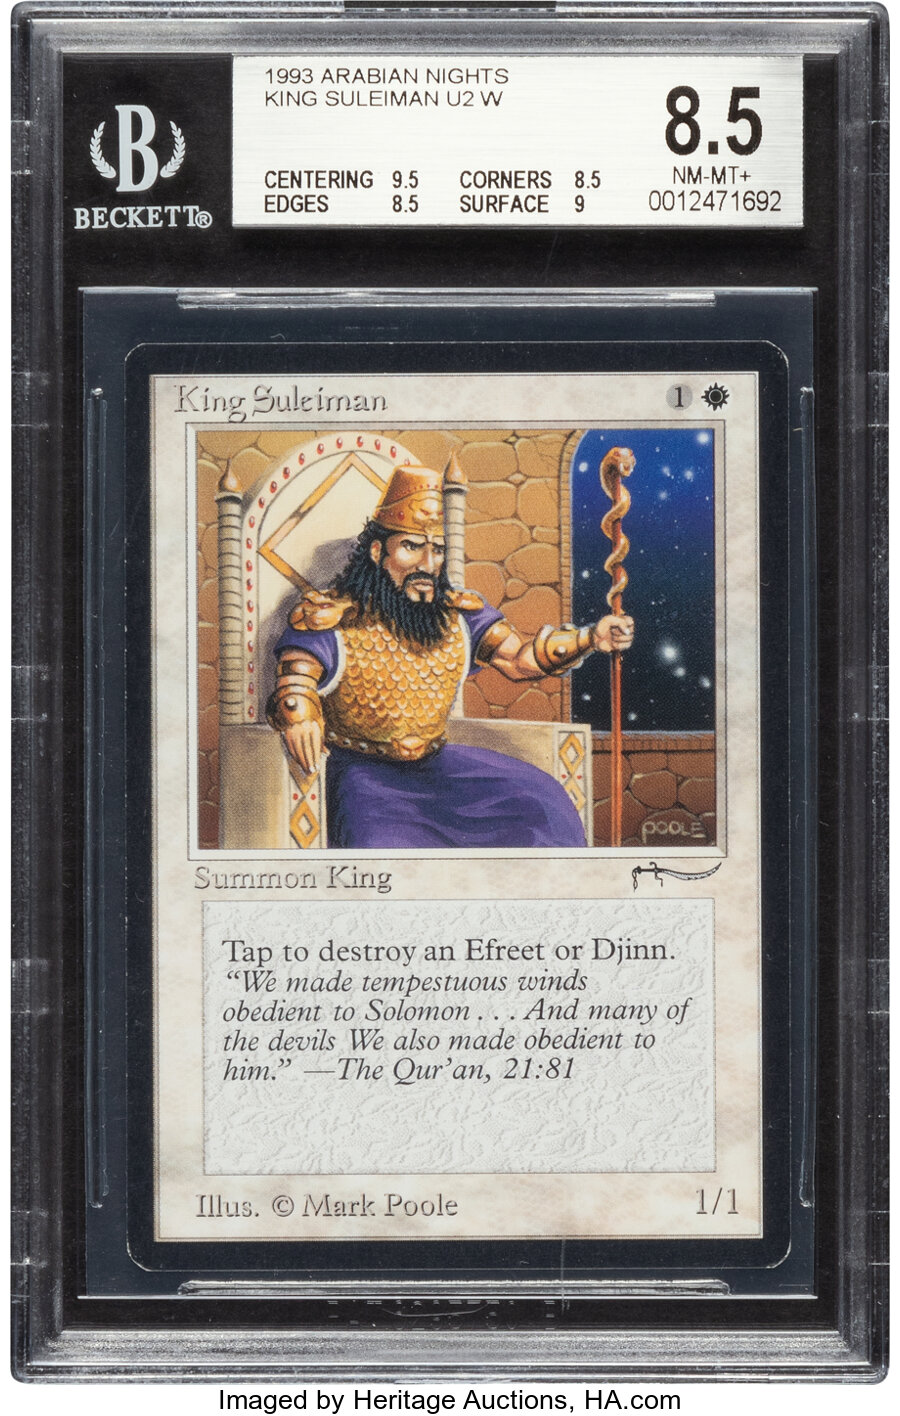 Magic: The Gathering King Suleiman Arabian Nights Edition BGS 8.5 (Wizards of the Coast, 1993)